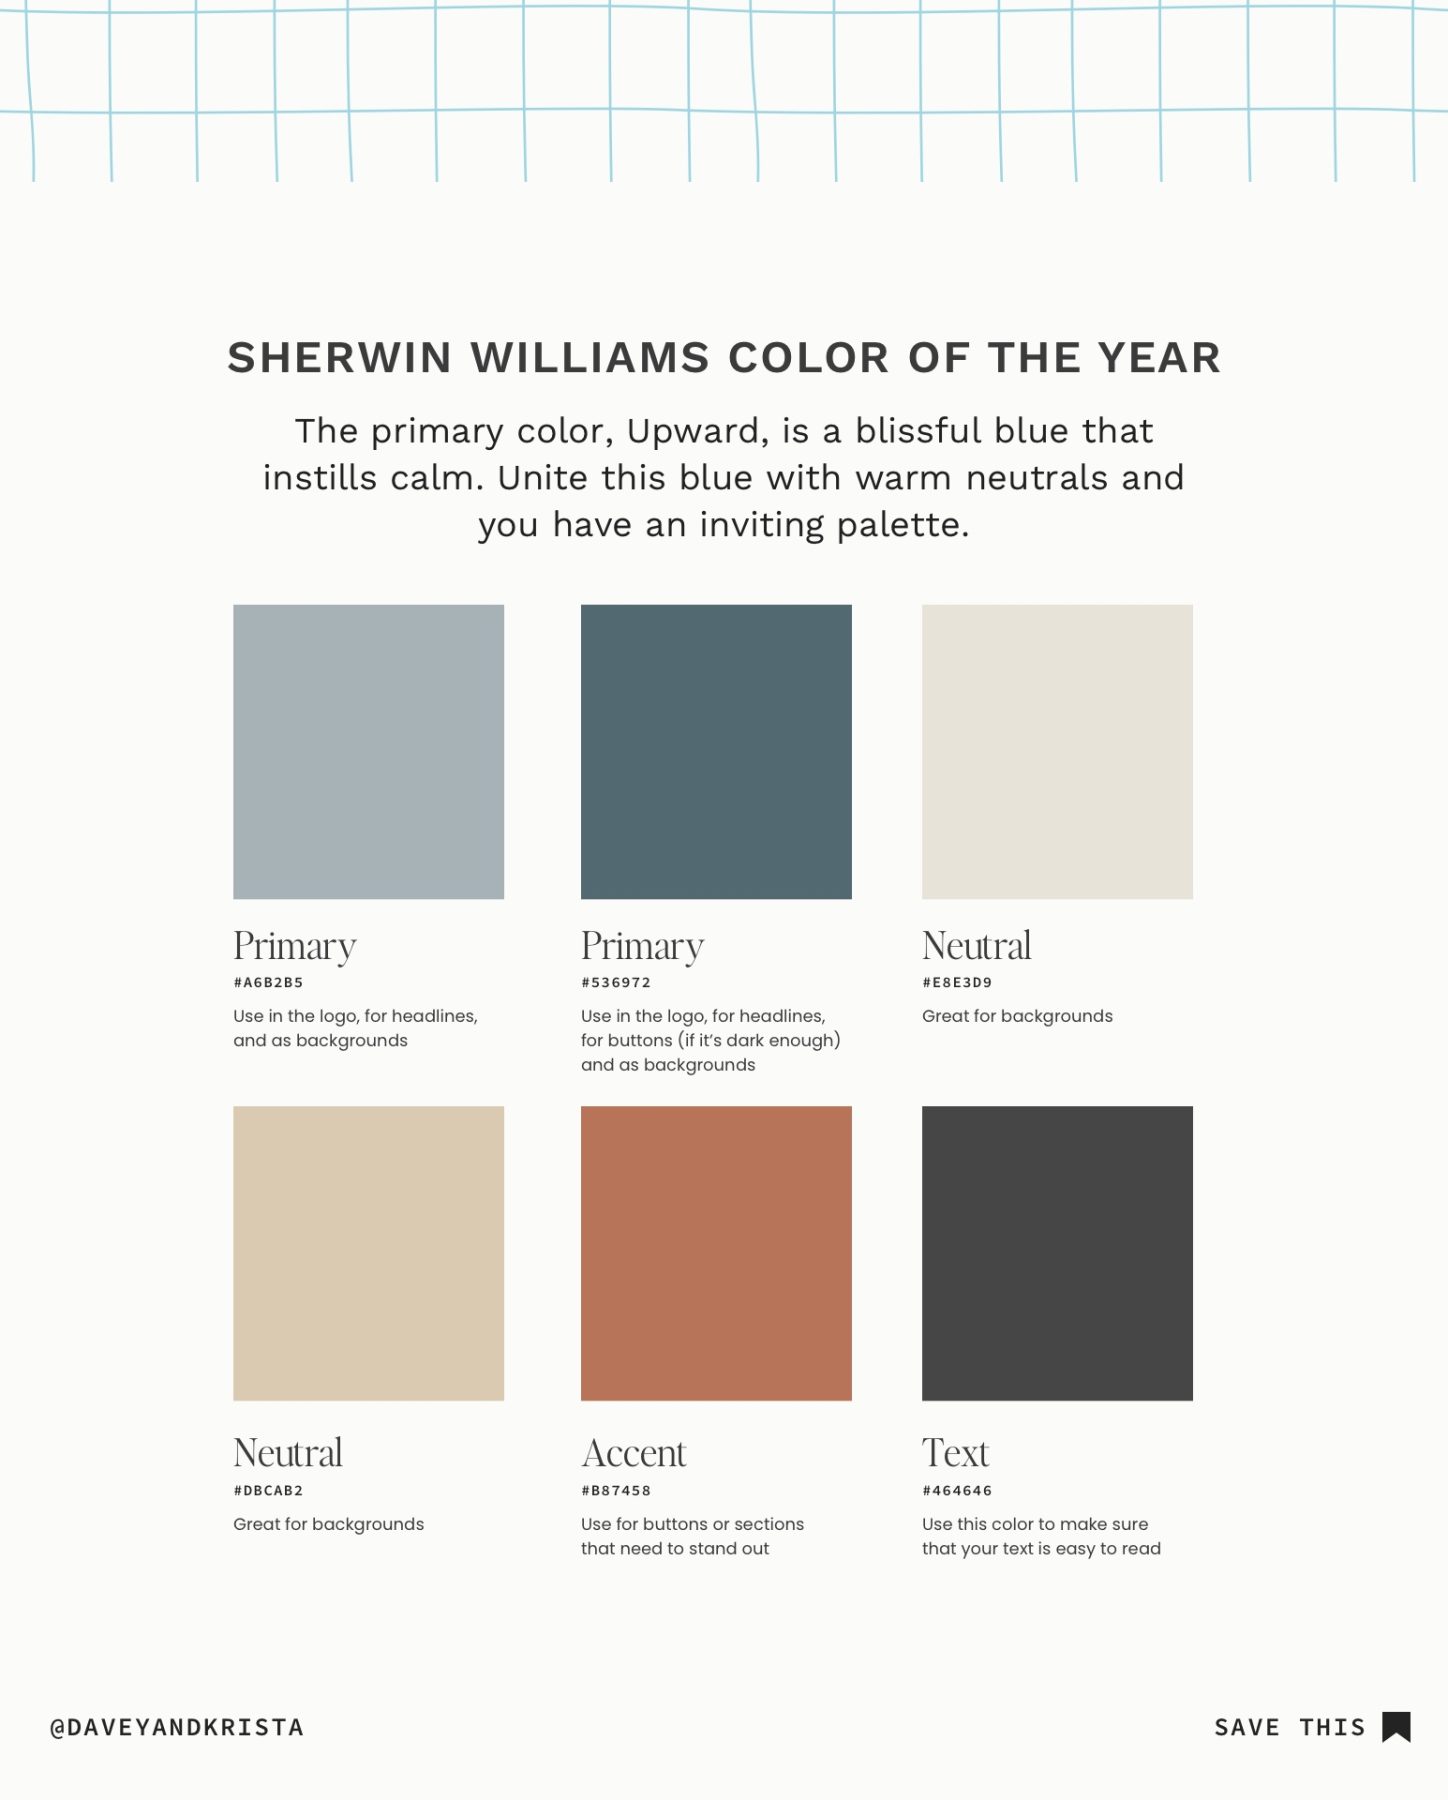 Sherwin Williams Color Palette for websites and brands. 